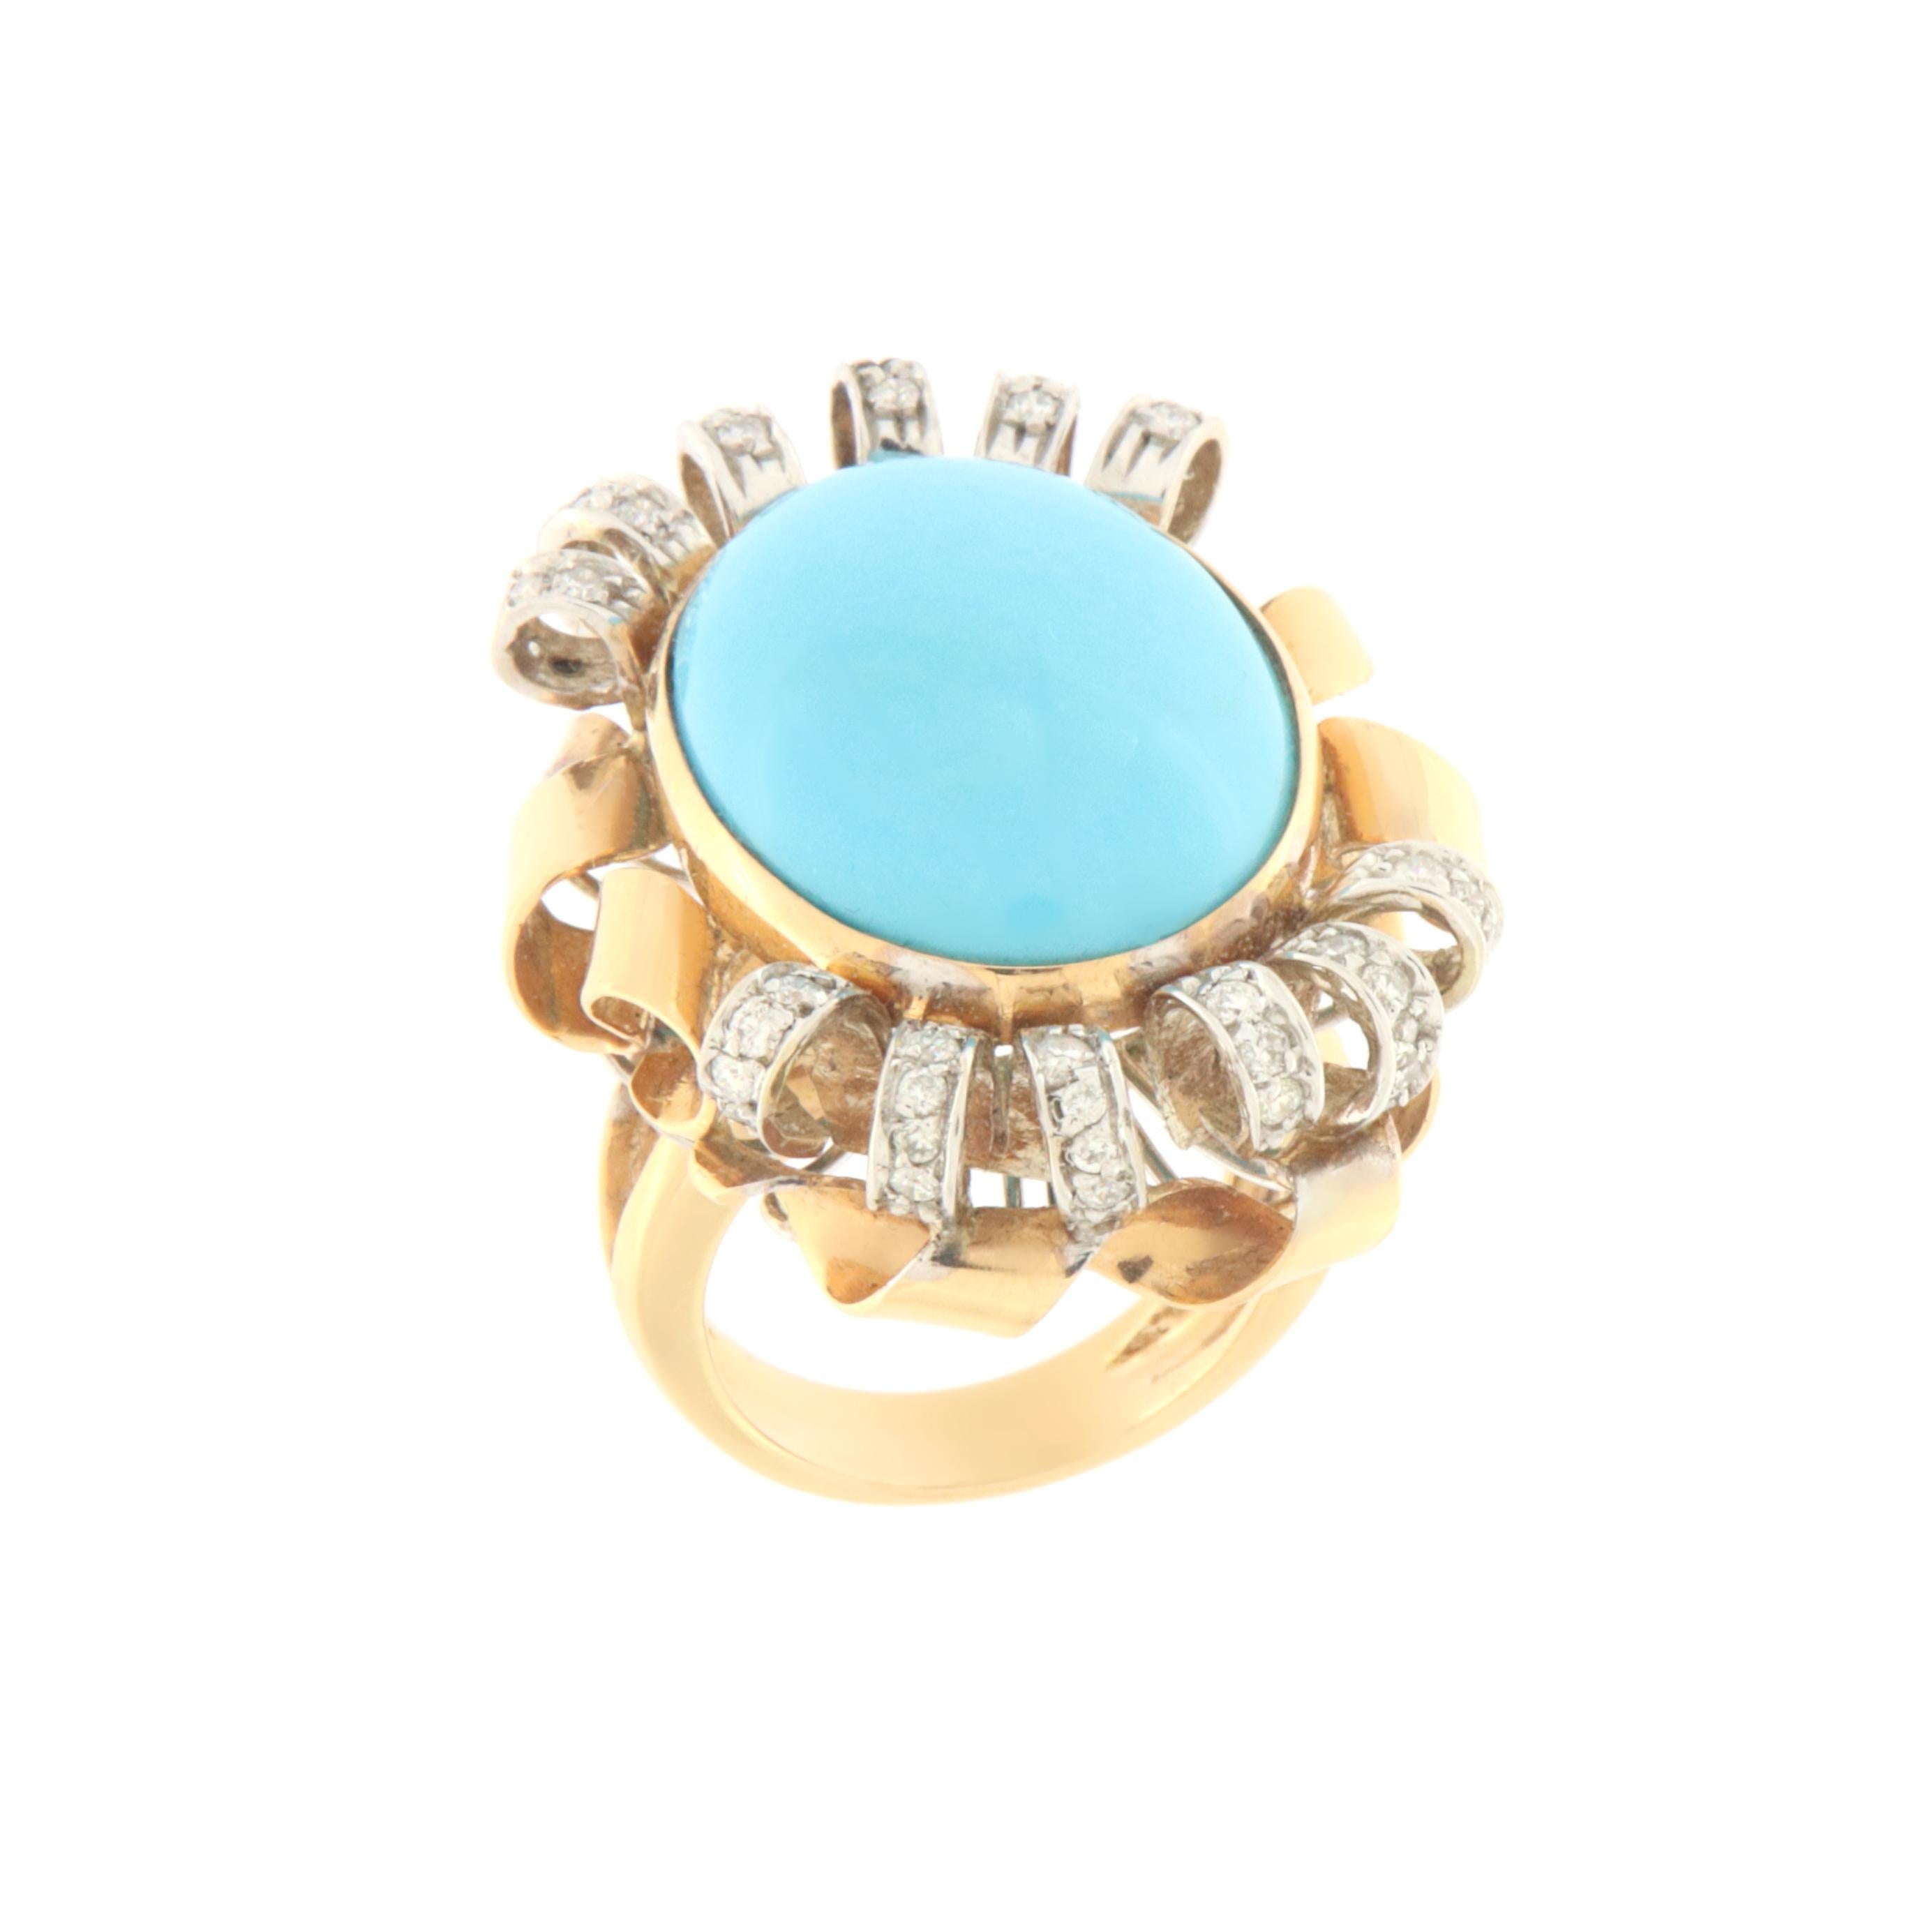 Fantastic ring made of 18 karat yellow and white gold with natural diamonds surrounding it on yellow gold and natural oval cut turquoise in the center,  entirely handmade by expert craftsmen in the sector.  The designer from the central stone alone